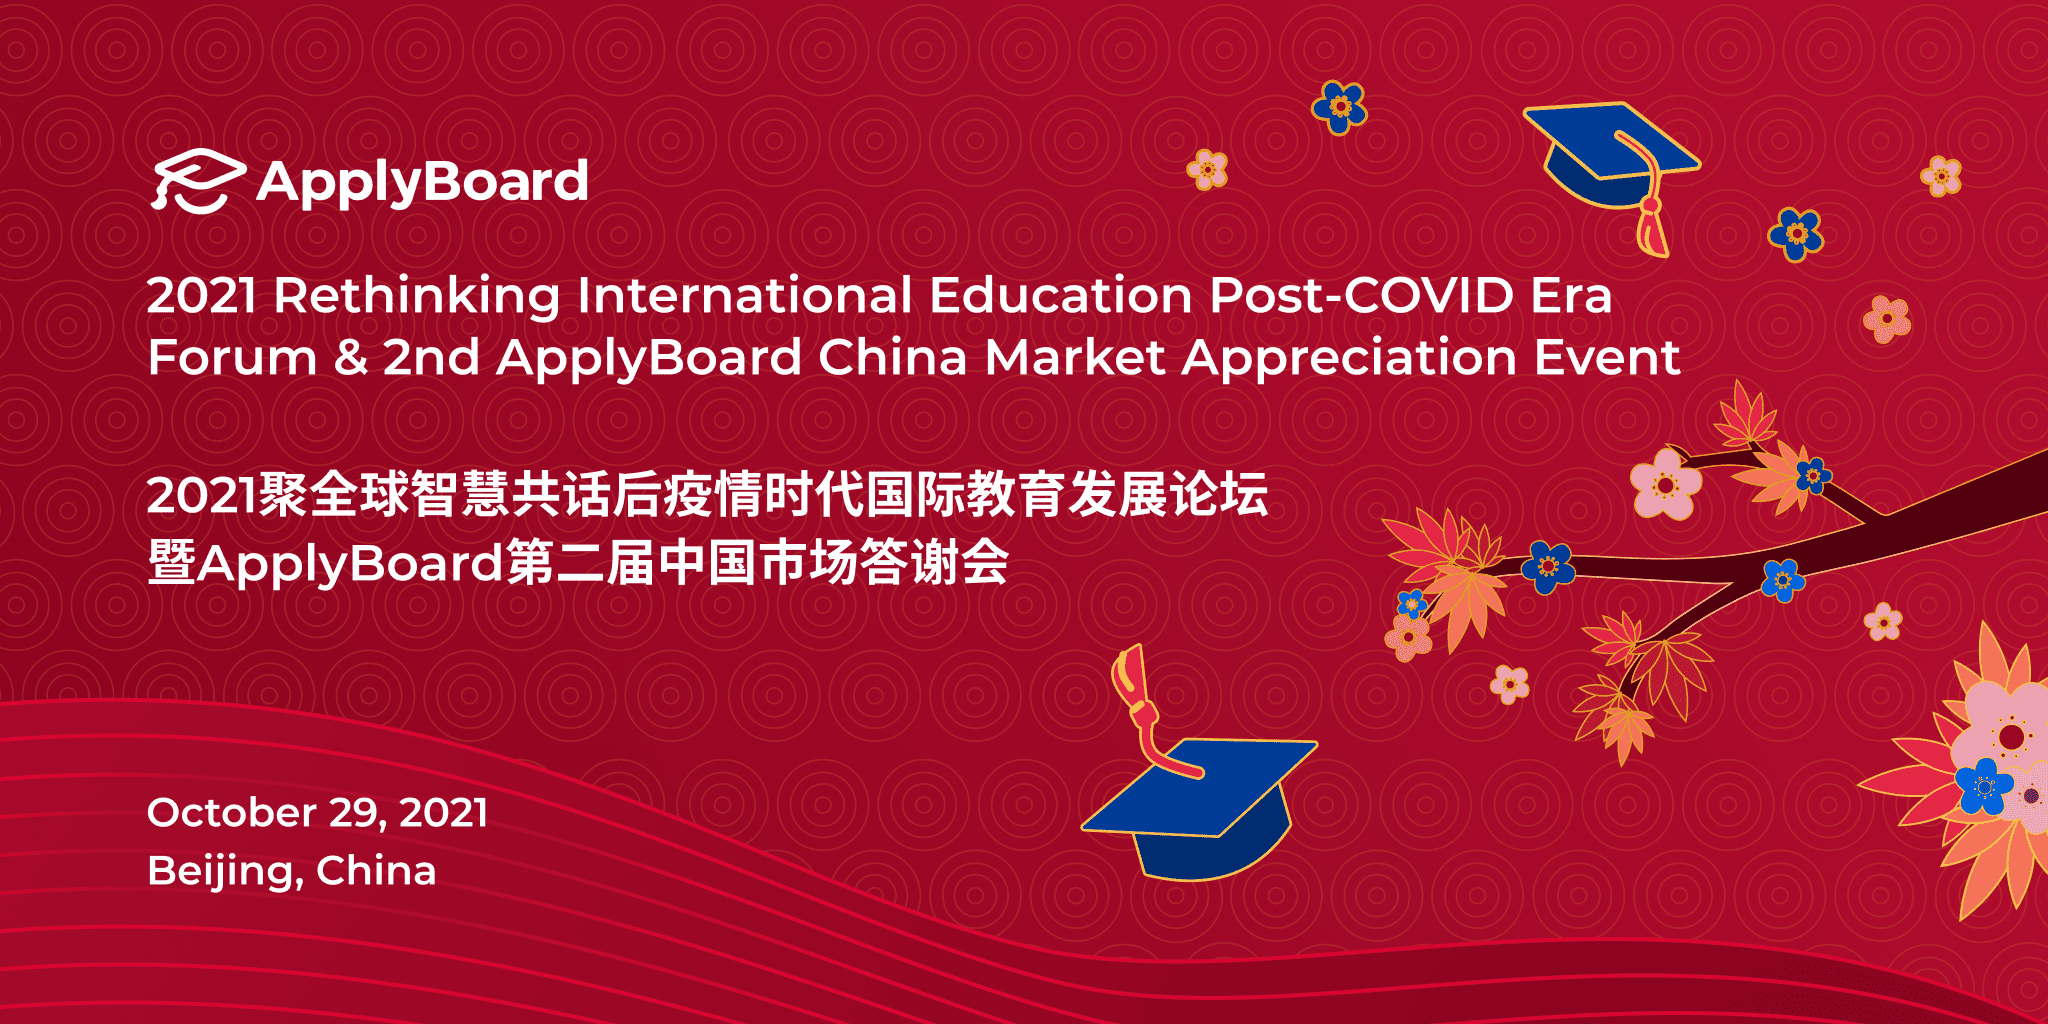 2021 Rethinking International Education Post-COVID Forum and 2nd ApplyBoard China Market Appreciation Event